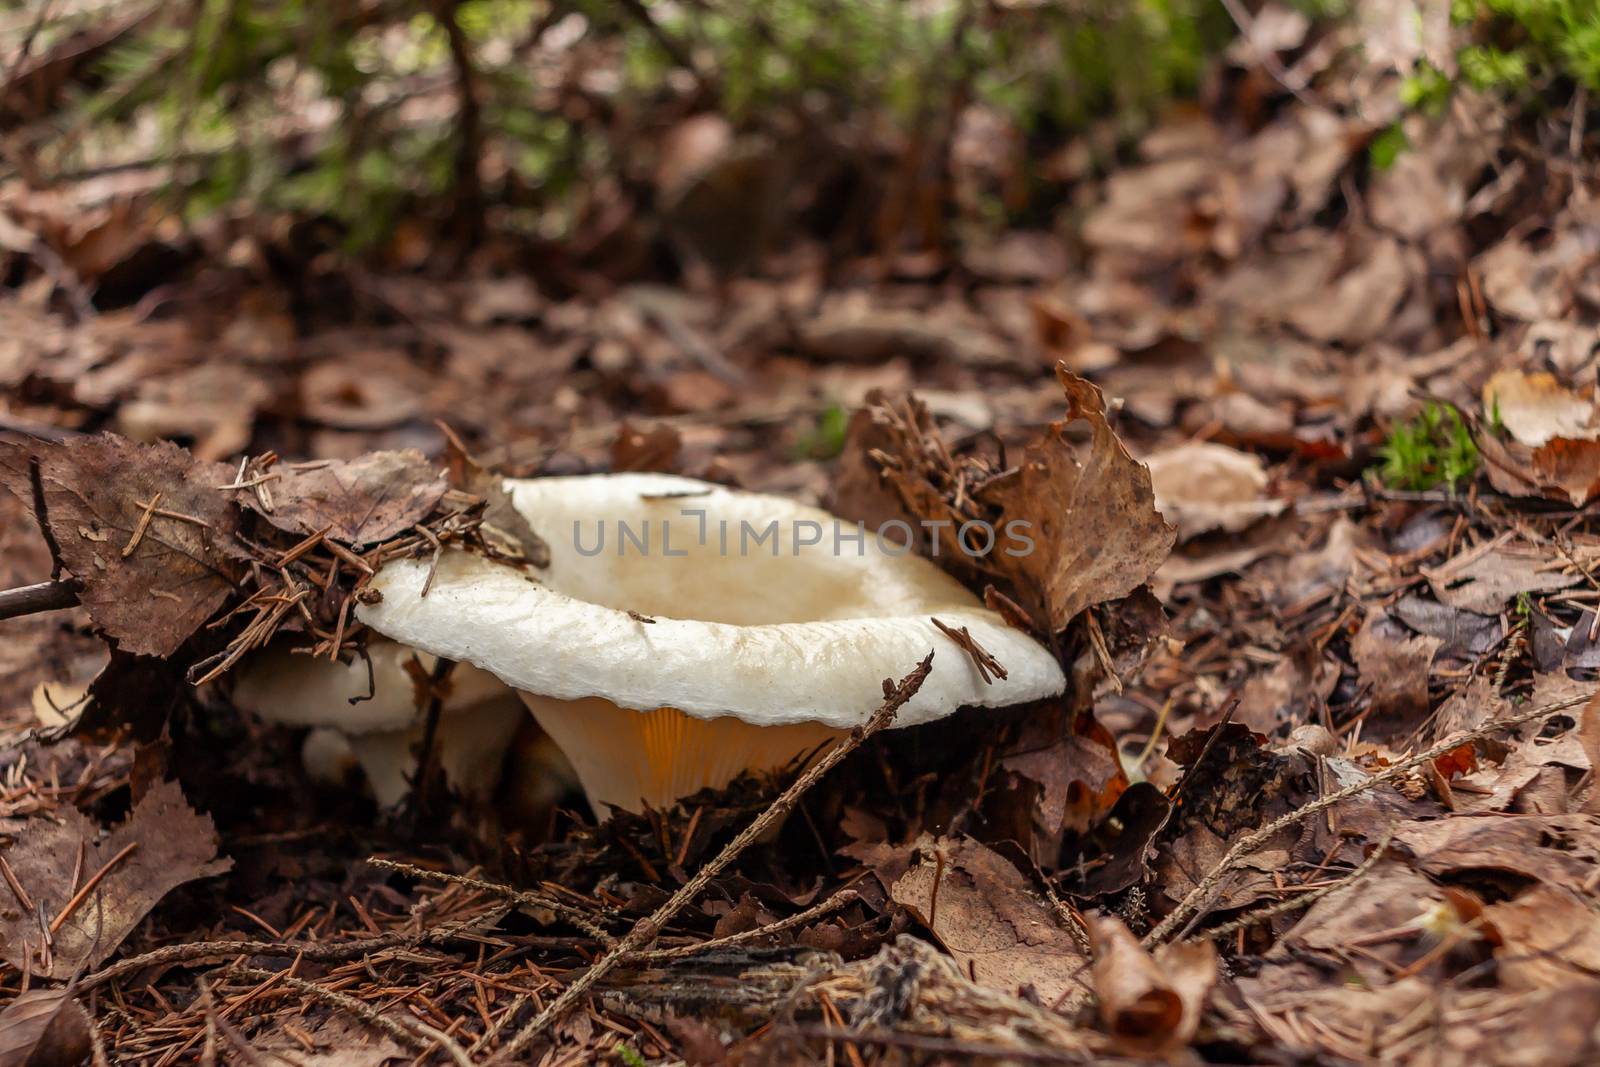 Edible forest mushroom Lactarius resimus known as the milky cup grows in the forest from under leaf litter. Pickles from it is considered a delicacy in Russia and Ukraine.